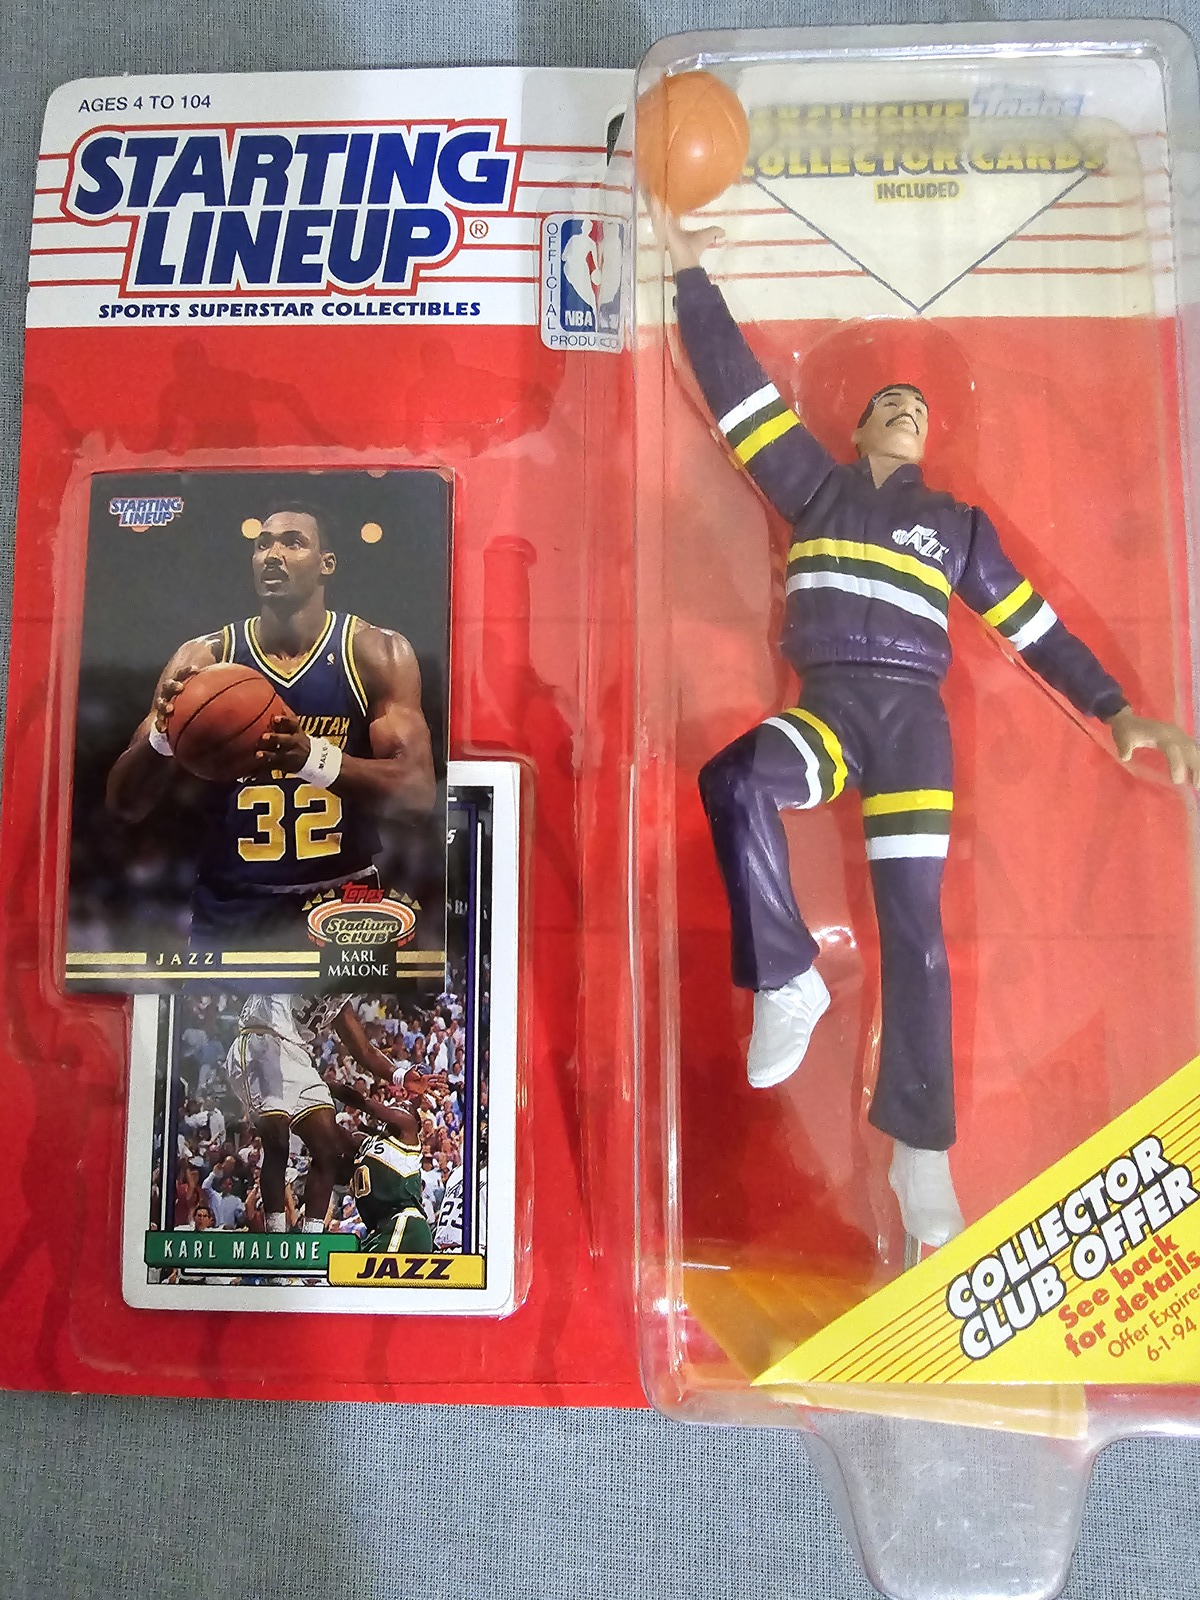 Primary image for Sports Karl Malone 1993 Starting Lineup Action Figure with Card